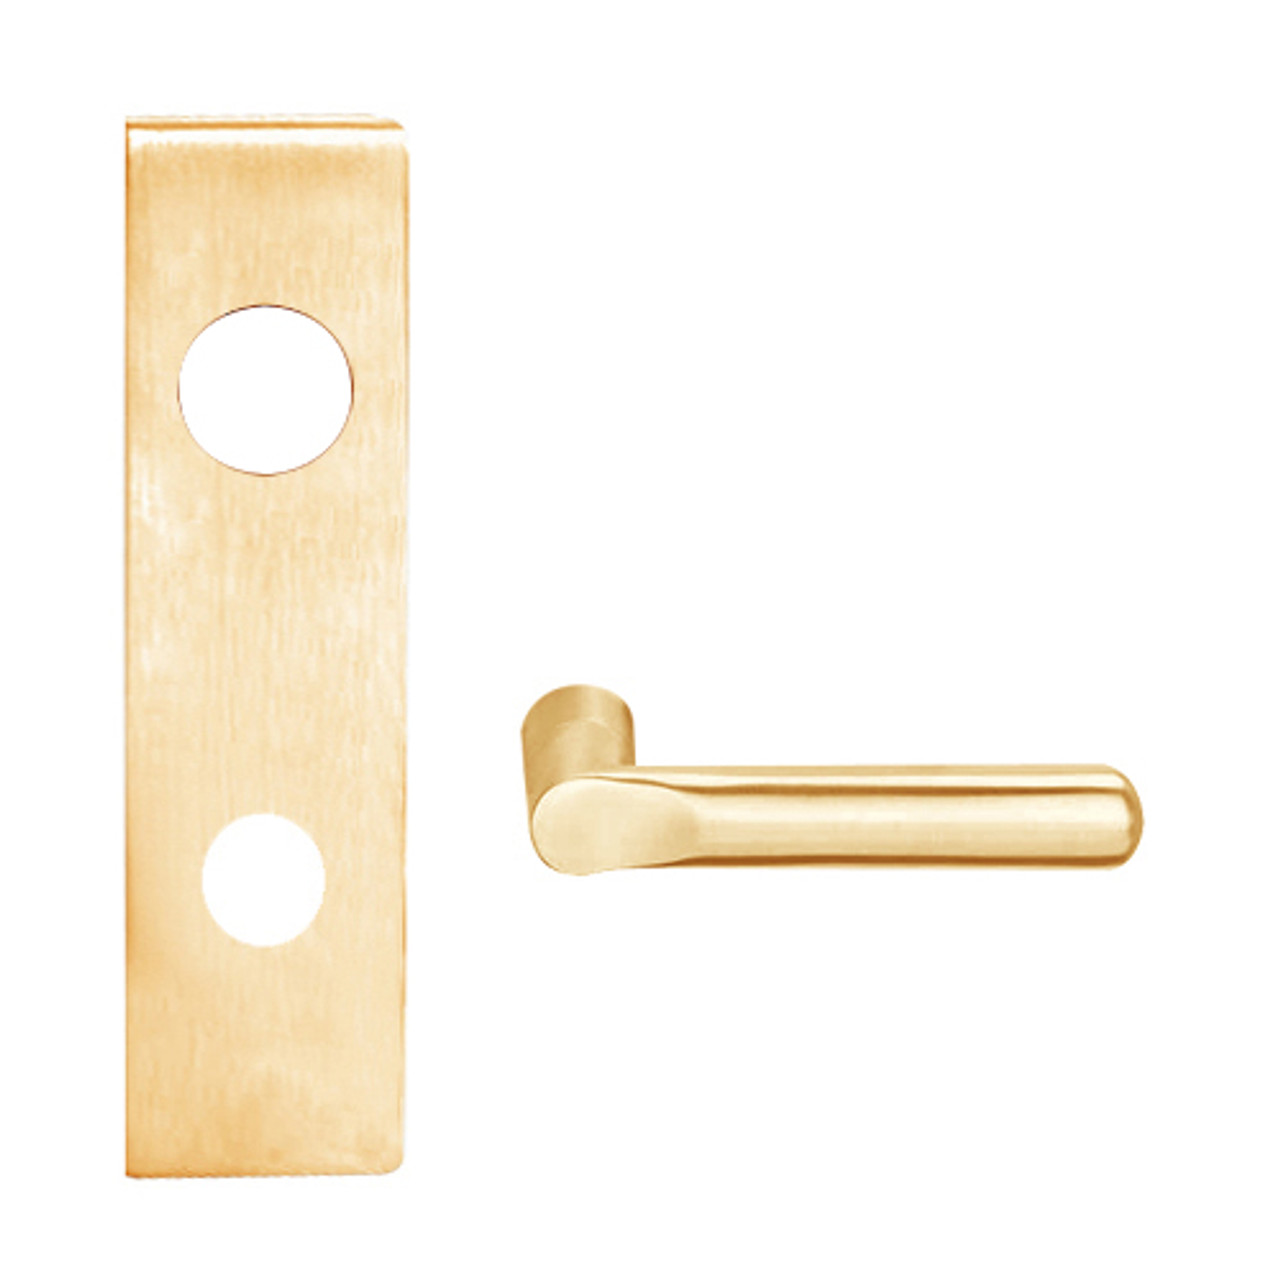 L9026R-18N-612 Schlage L Series Exit Lock with Cylinder Commercial Mortise Lock with 18 Cast Lever Design and Full Size Core in Satin Bronze